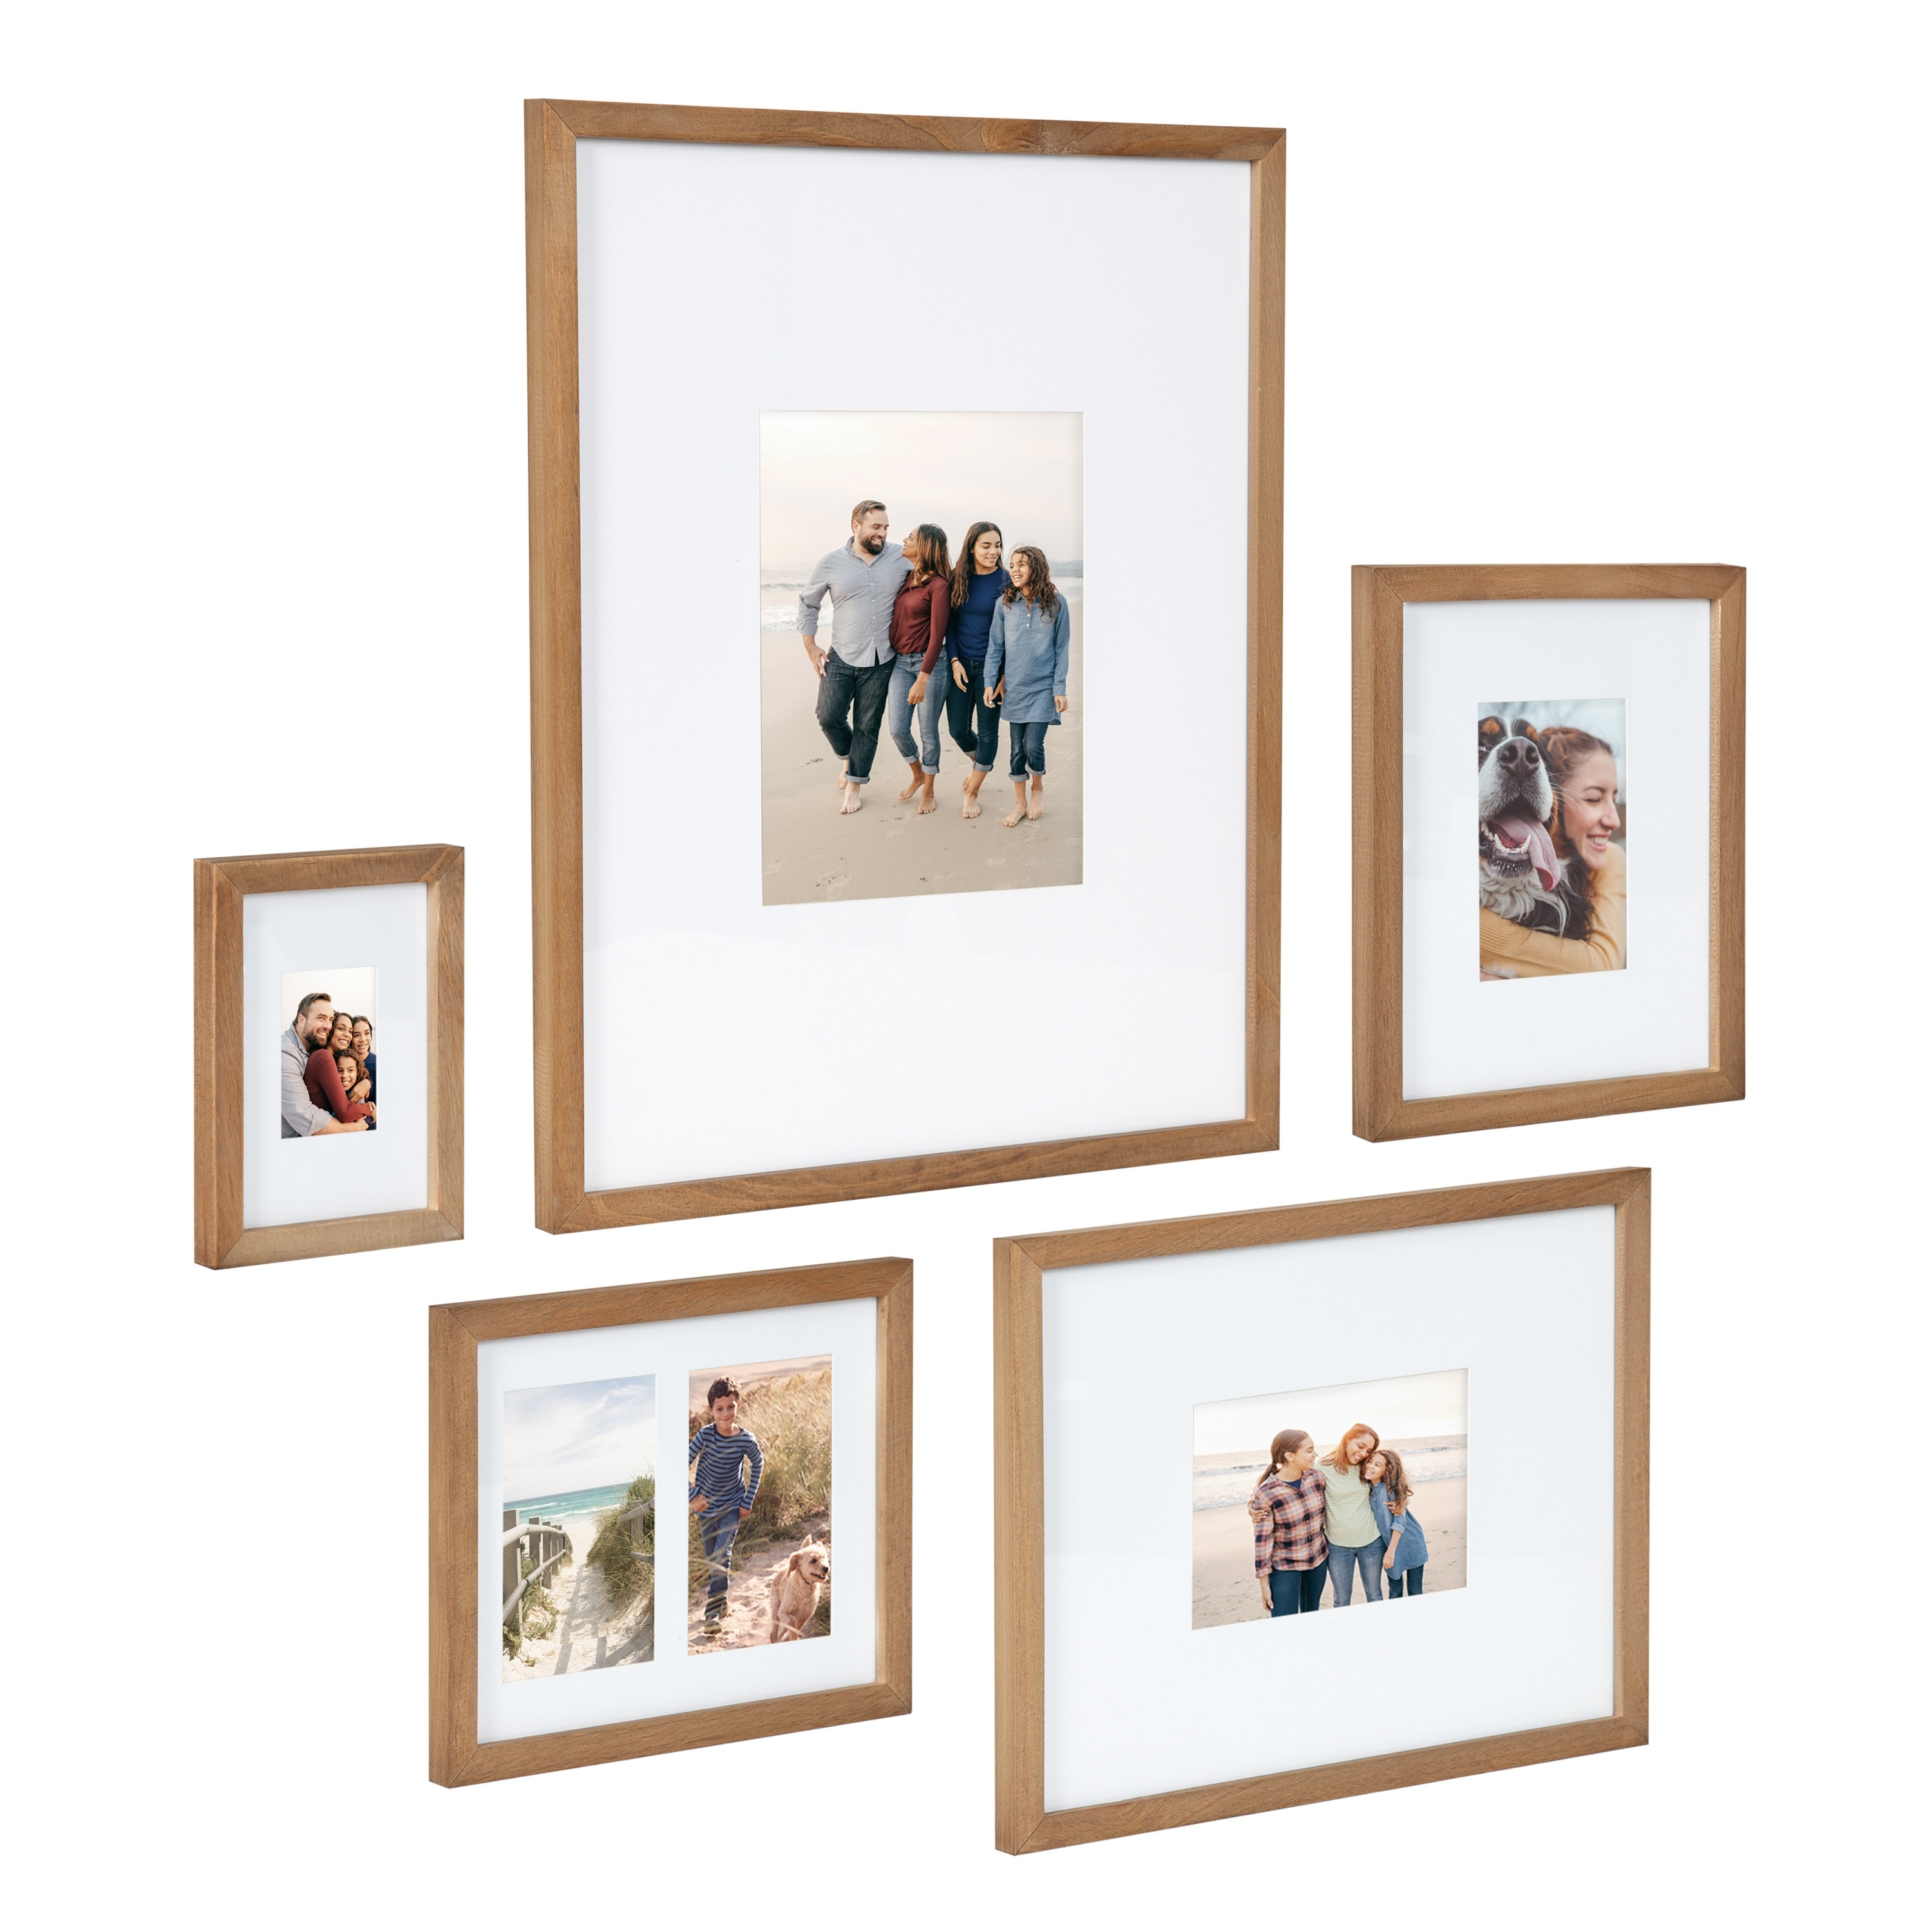 DesignOvation Gallery Wood Wall Picture Frame Walnut Brown (Set of 2) -  16x20 matted to 8x10 - (As Is Item) - Bed Bath & Beyond - 29923753